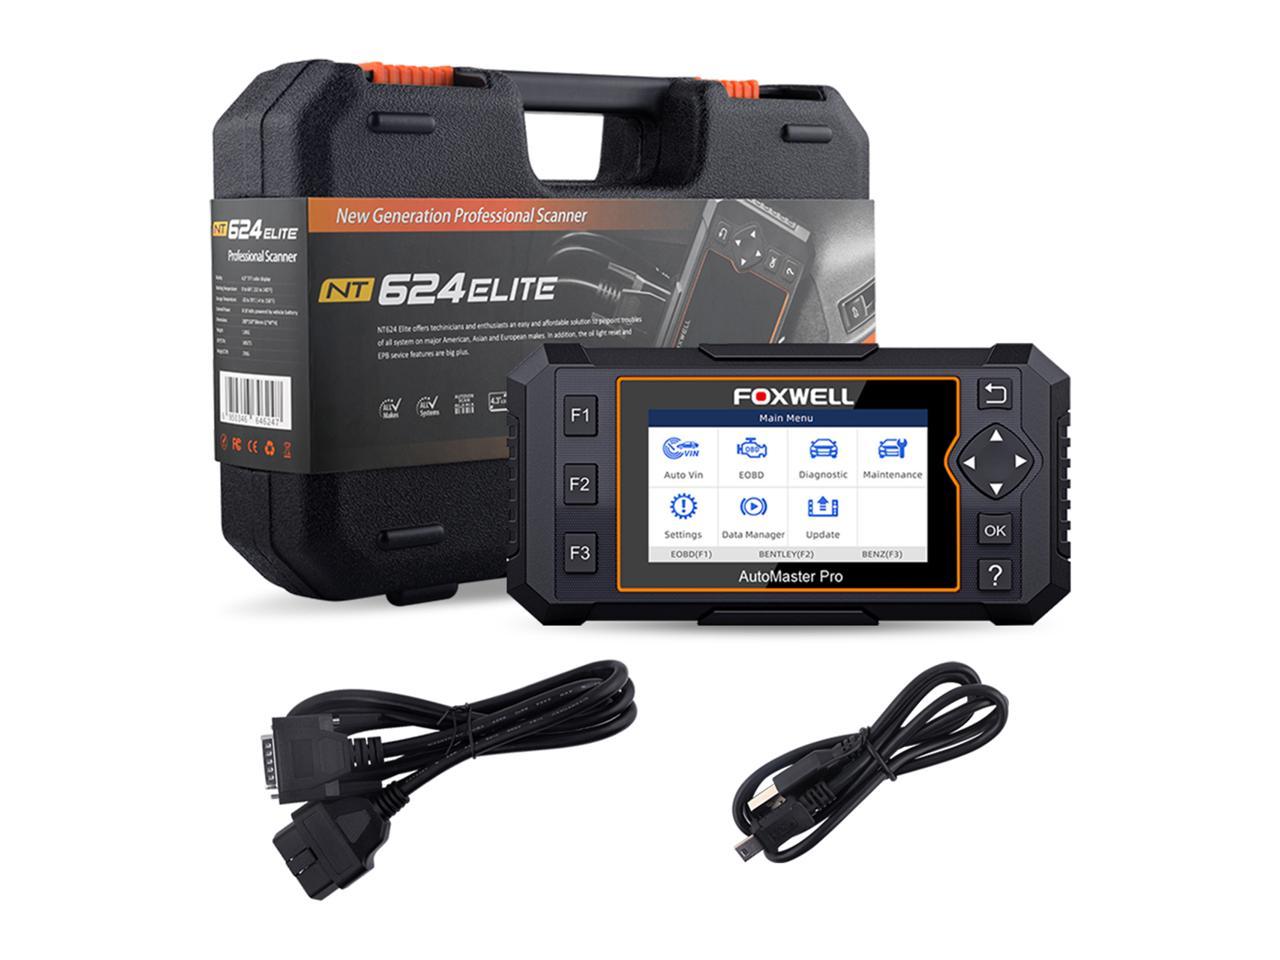 Foxwell OBD2 Scanner All Full System Diagnostic Tool Oil EPB Reset Code Reader